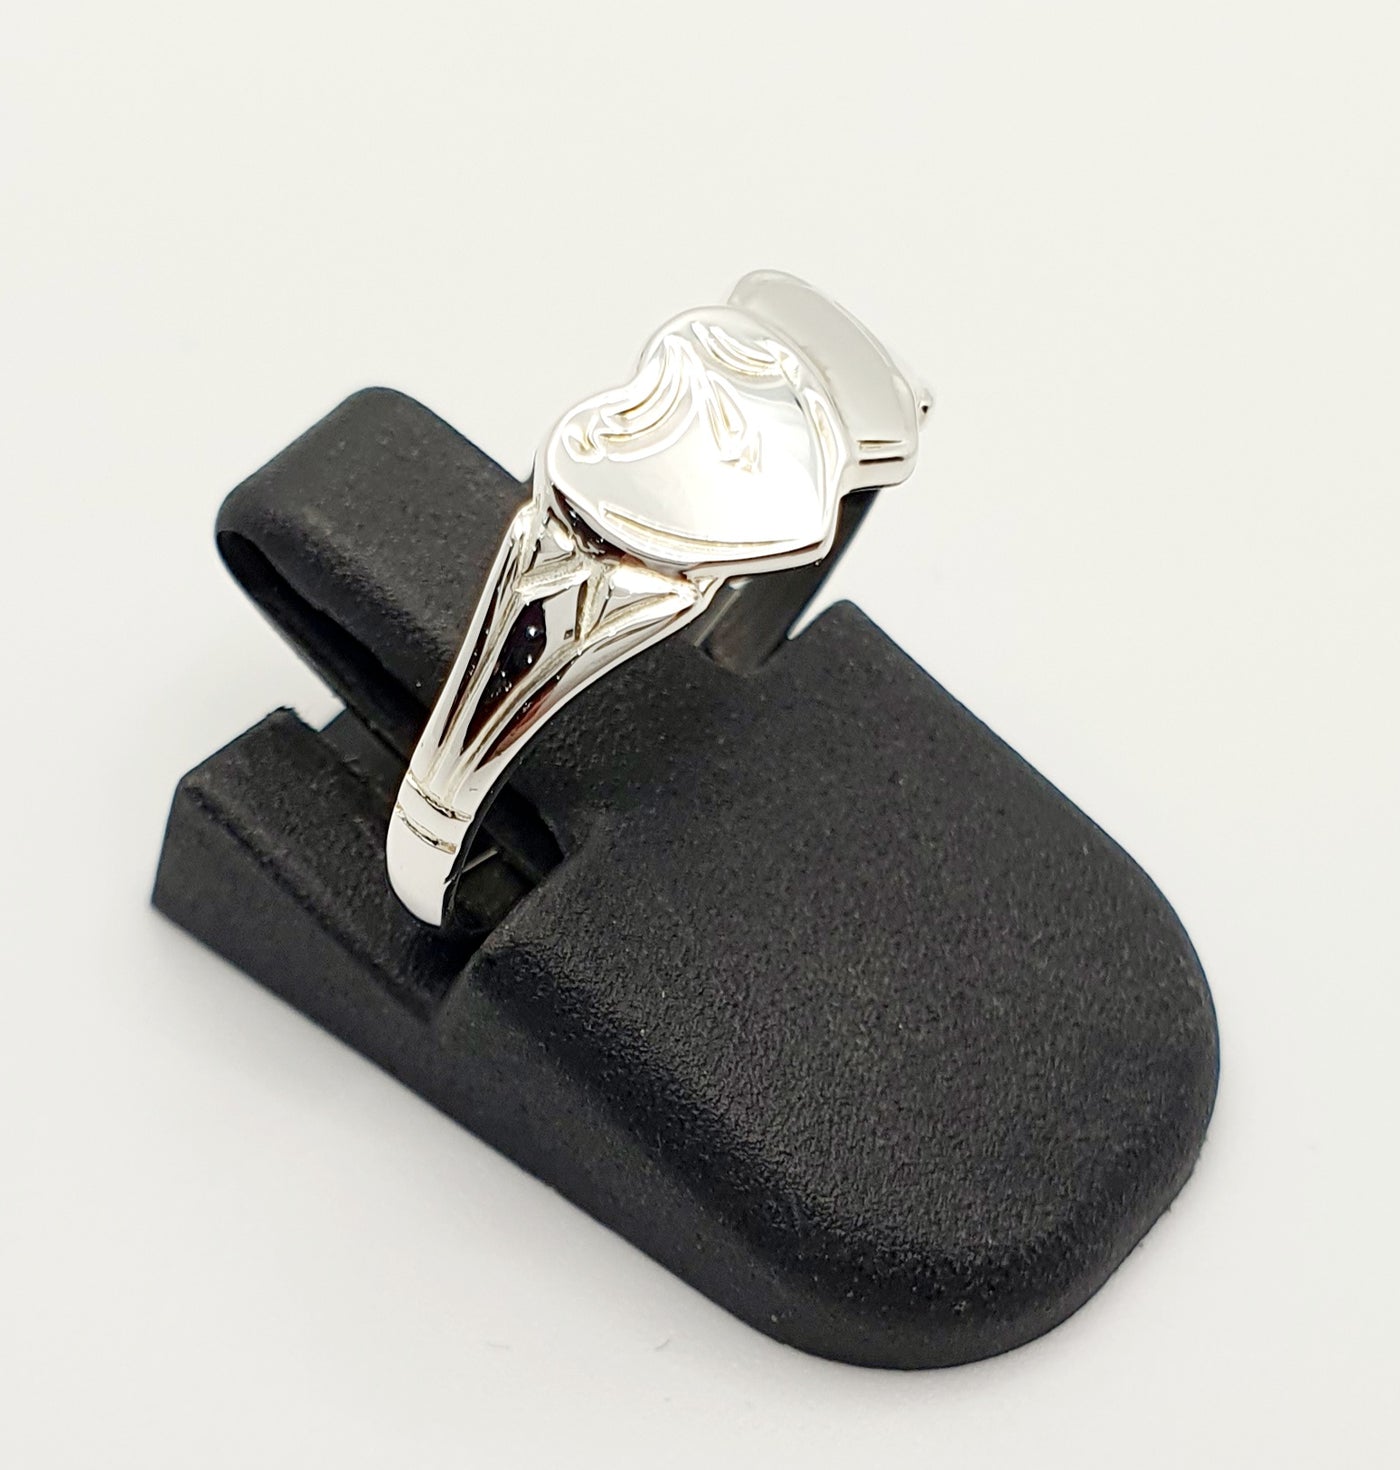 S/S Double Heart Signet Ring. Size I